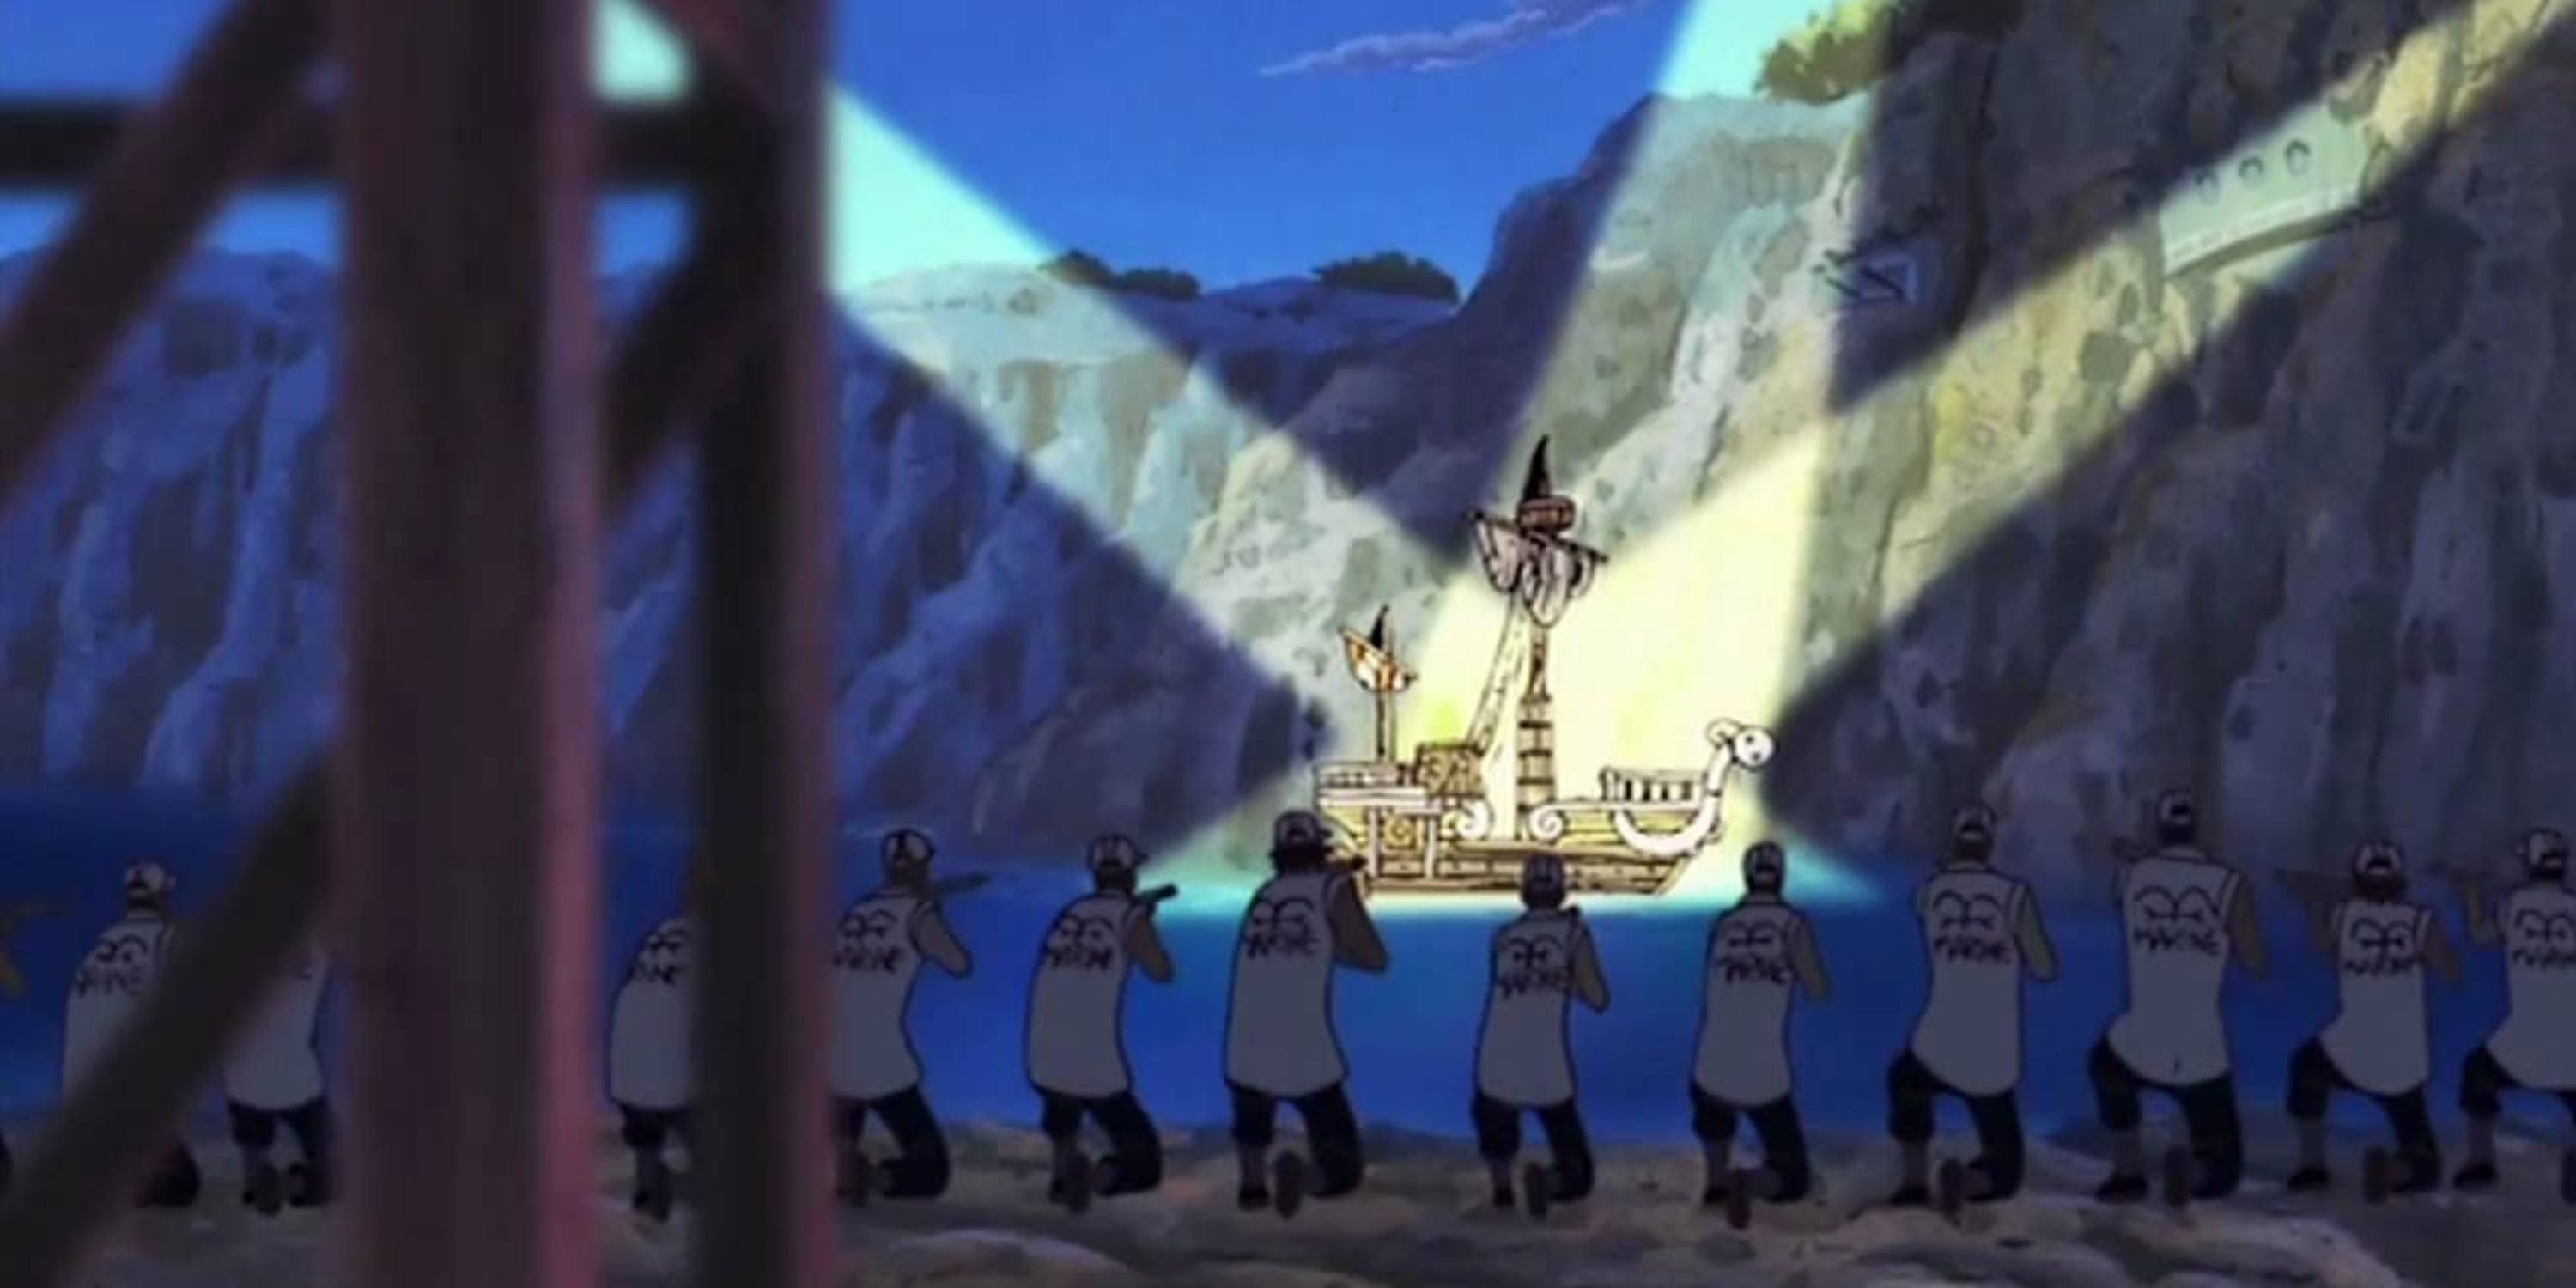 Spotlights hit a boat in One Piece's G-8 Filler Arc.